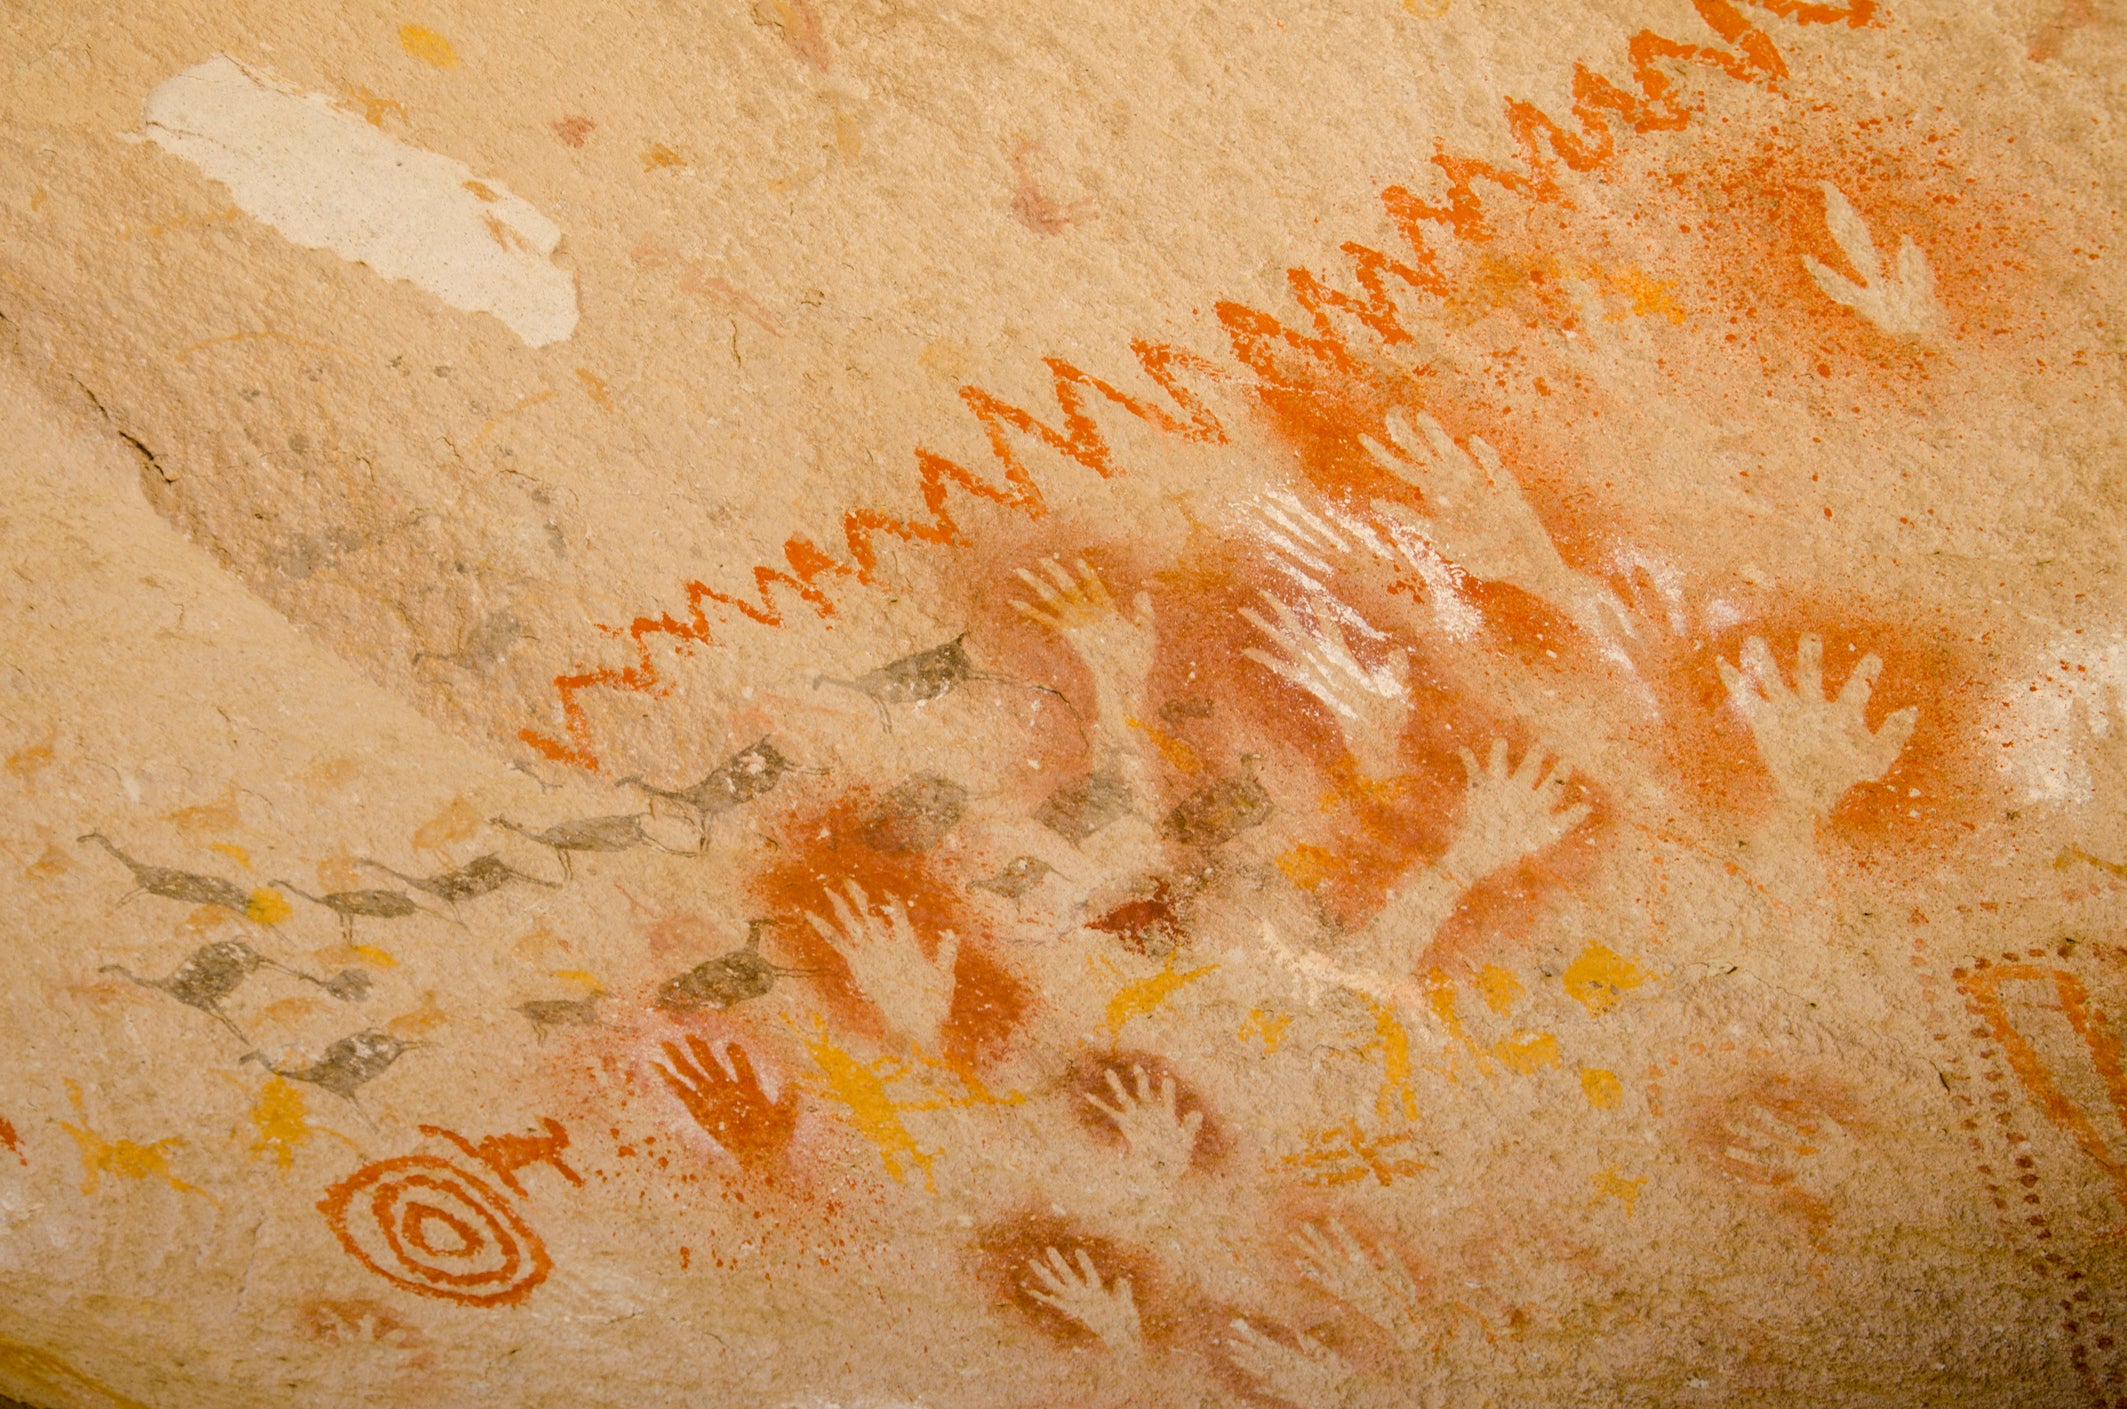 Whether they’re simple stencils of hands or complex drawings of prey, cave paintings are a window into the minds of the very first artists